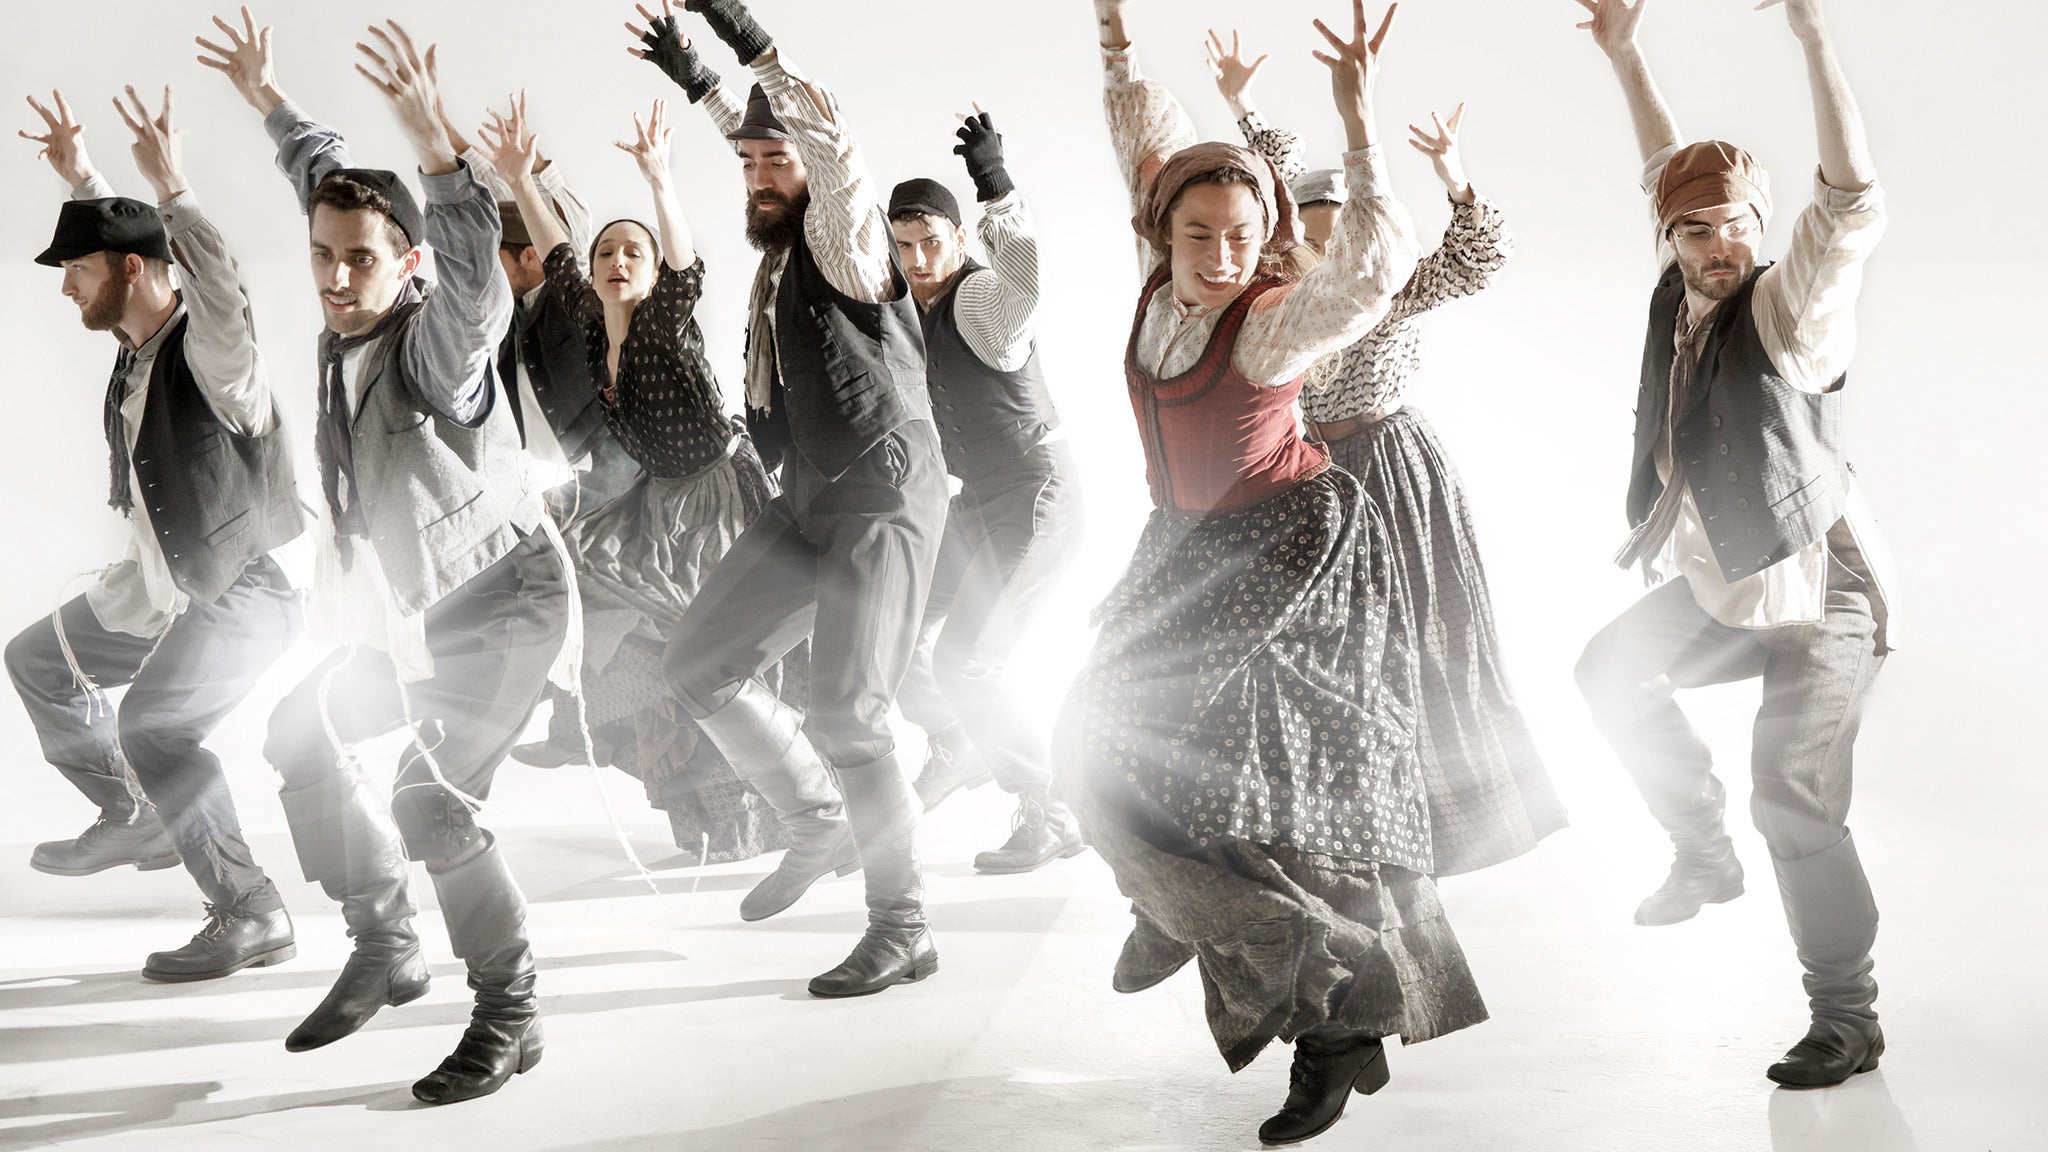 Broadway in Akron-Fiddler on the Roof  in Akron promo photo for Exclusive presale offer code